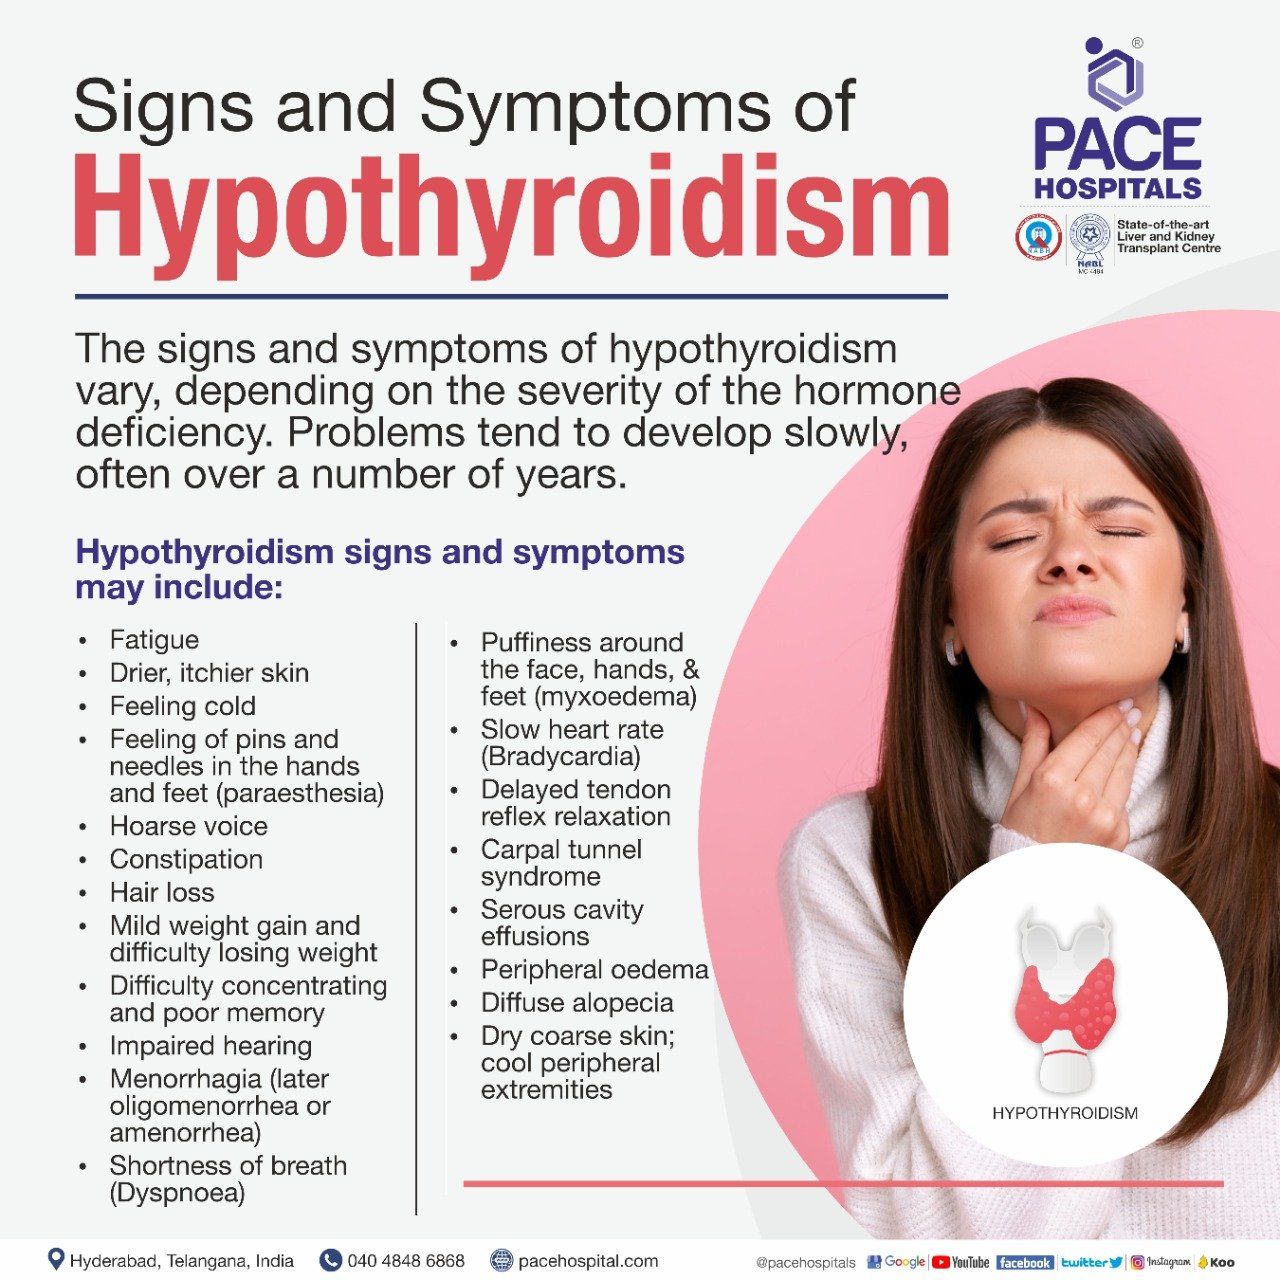 Signs and Symptoms of Hypothyroidism